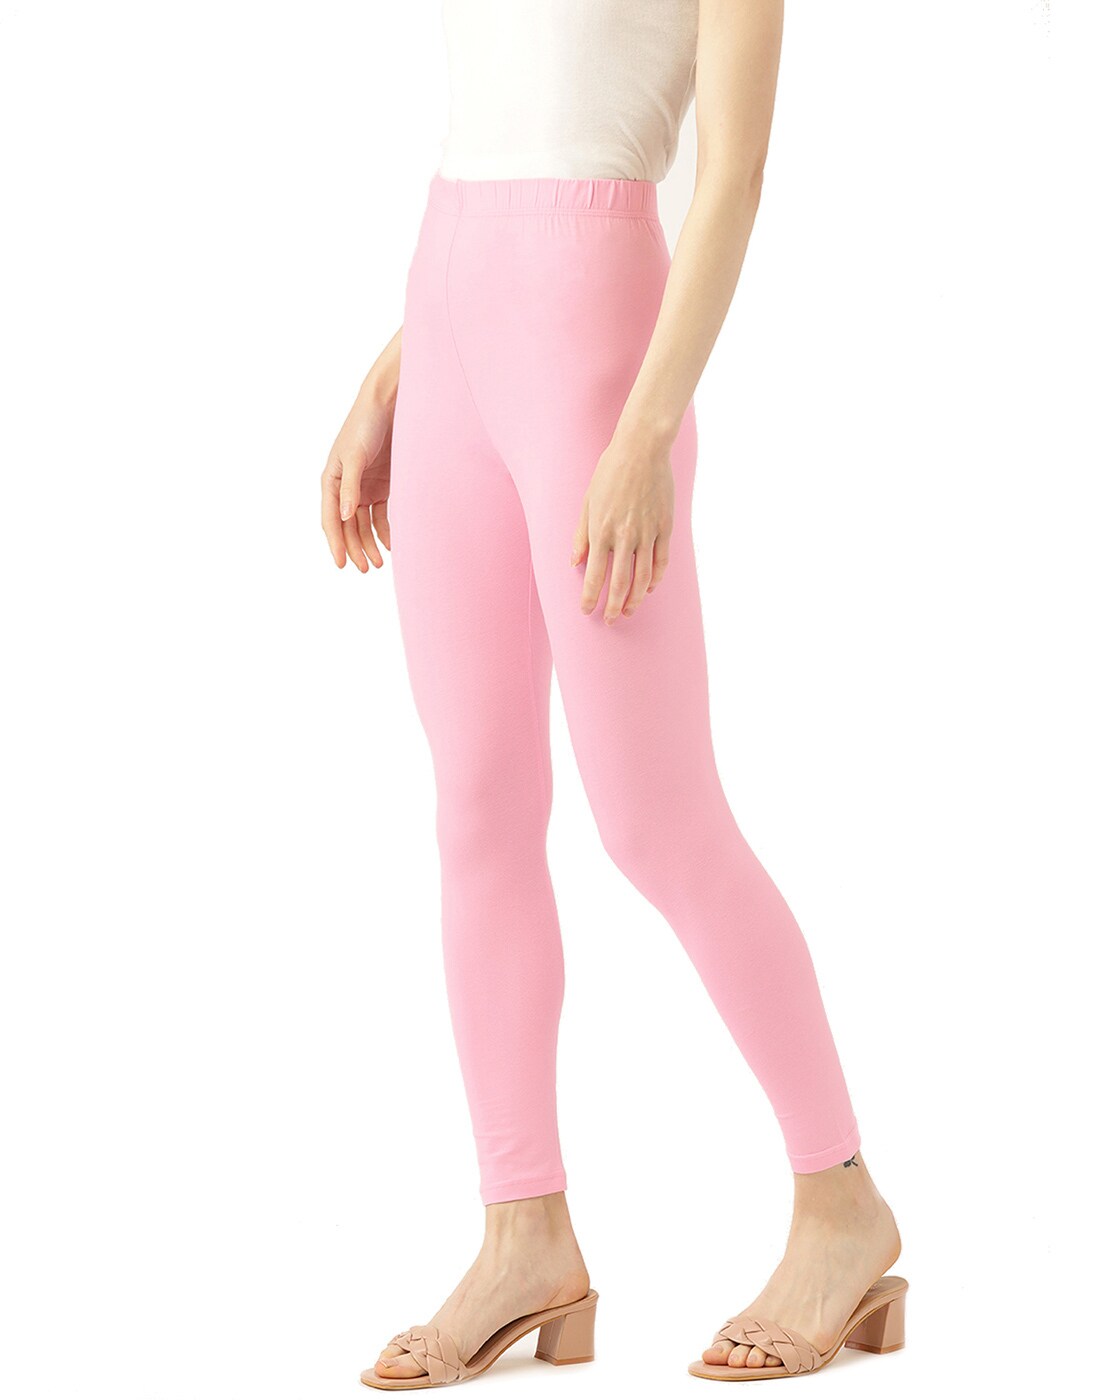 LLG Quote: PILATES. Women's long leggings. 3 Colors w. White & Pink Letters  w. Logo and Signature. — Ladies' Life Guide